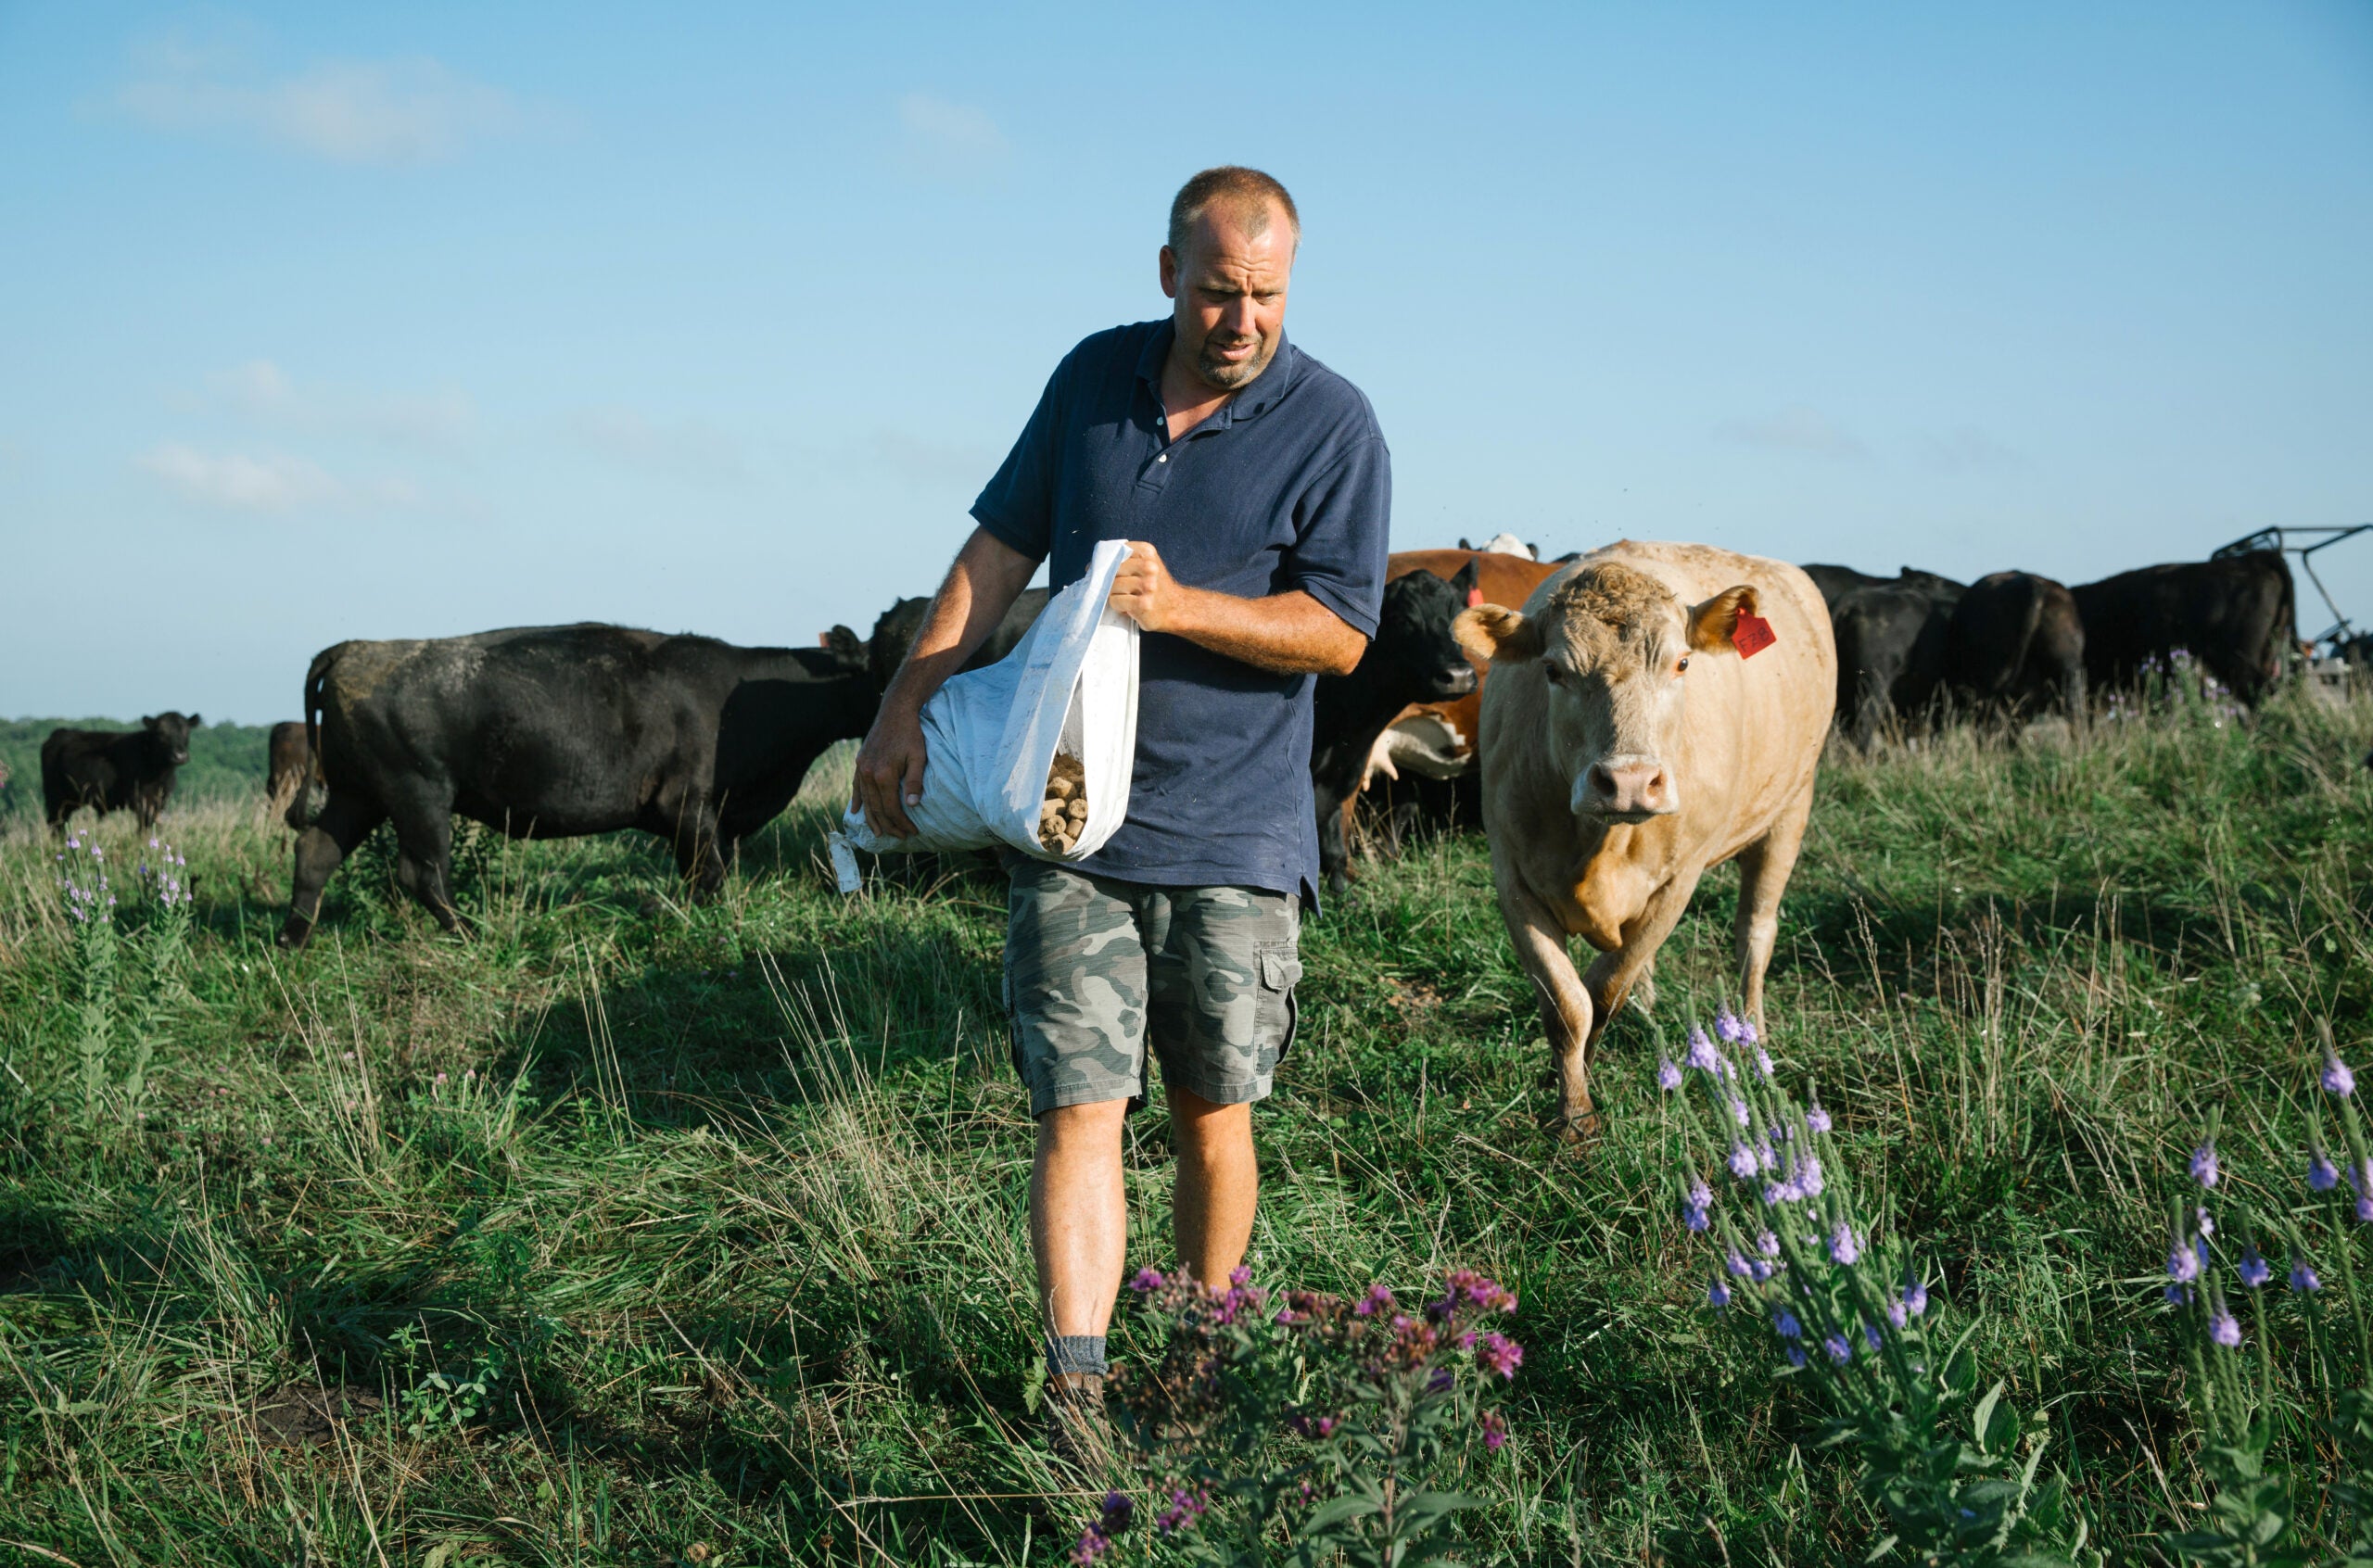 Farmers in Iowa, like Seth Watkins shown here feeding his cows, are restoring the land and climate by combining age-old practices with new knowledge.